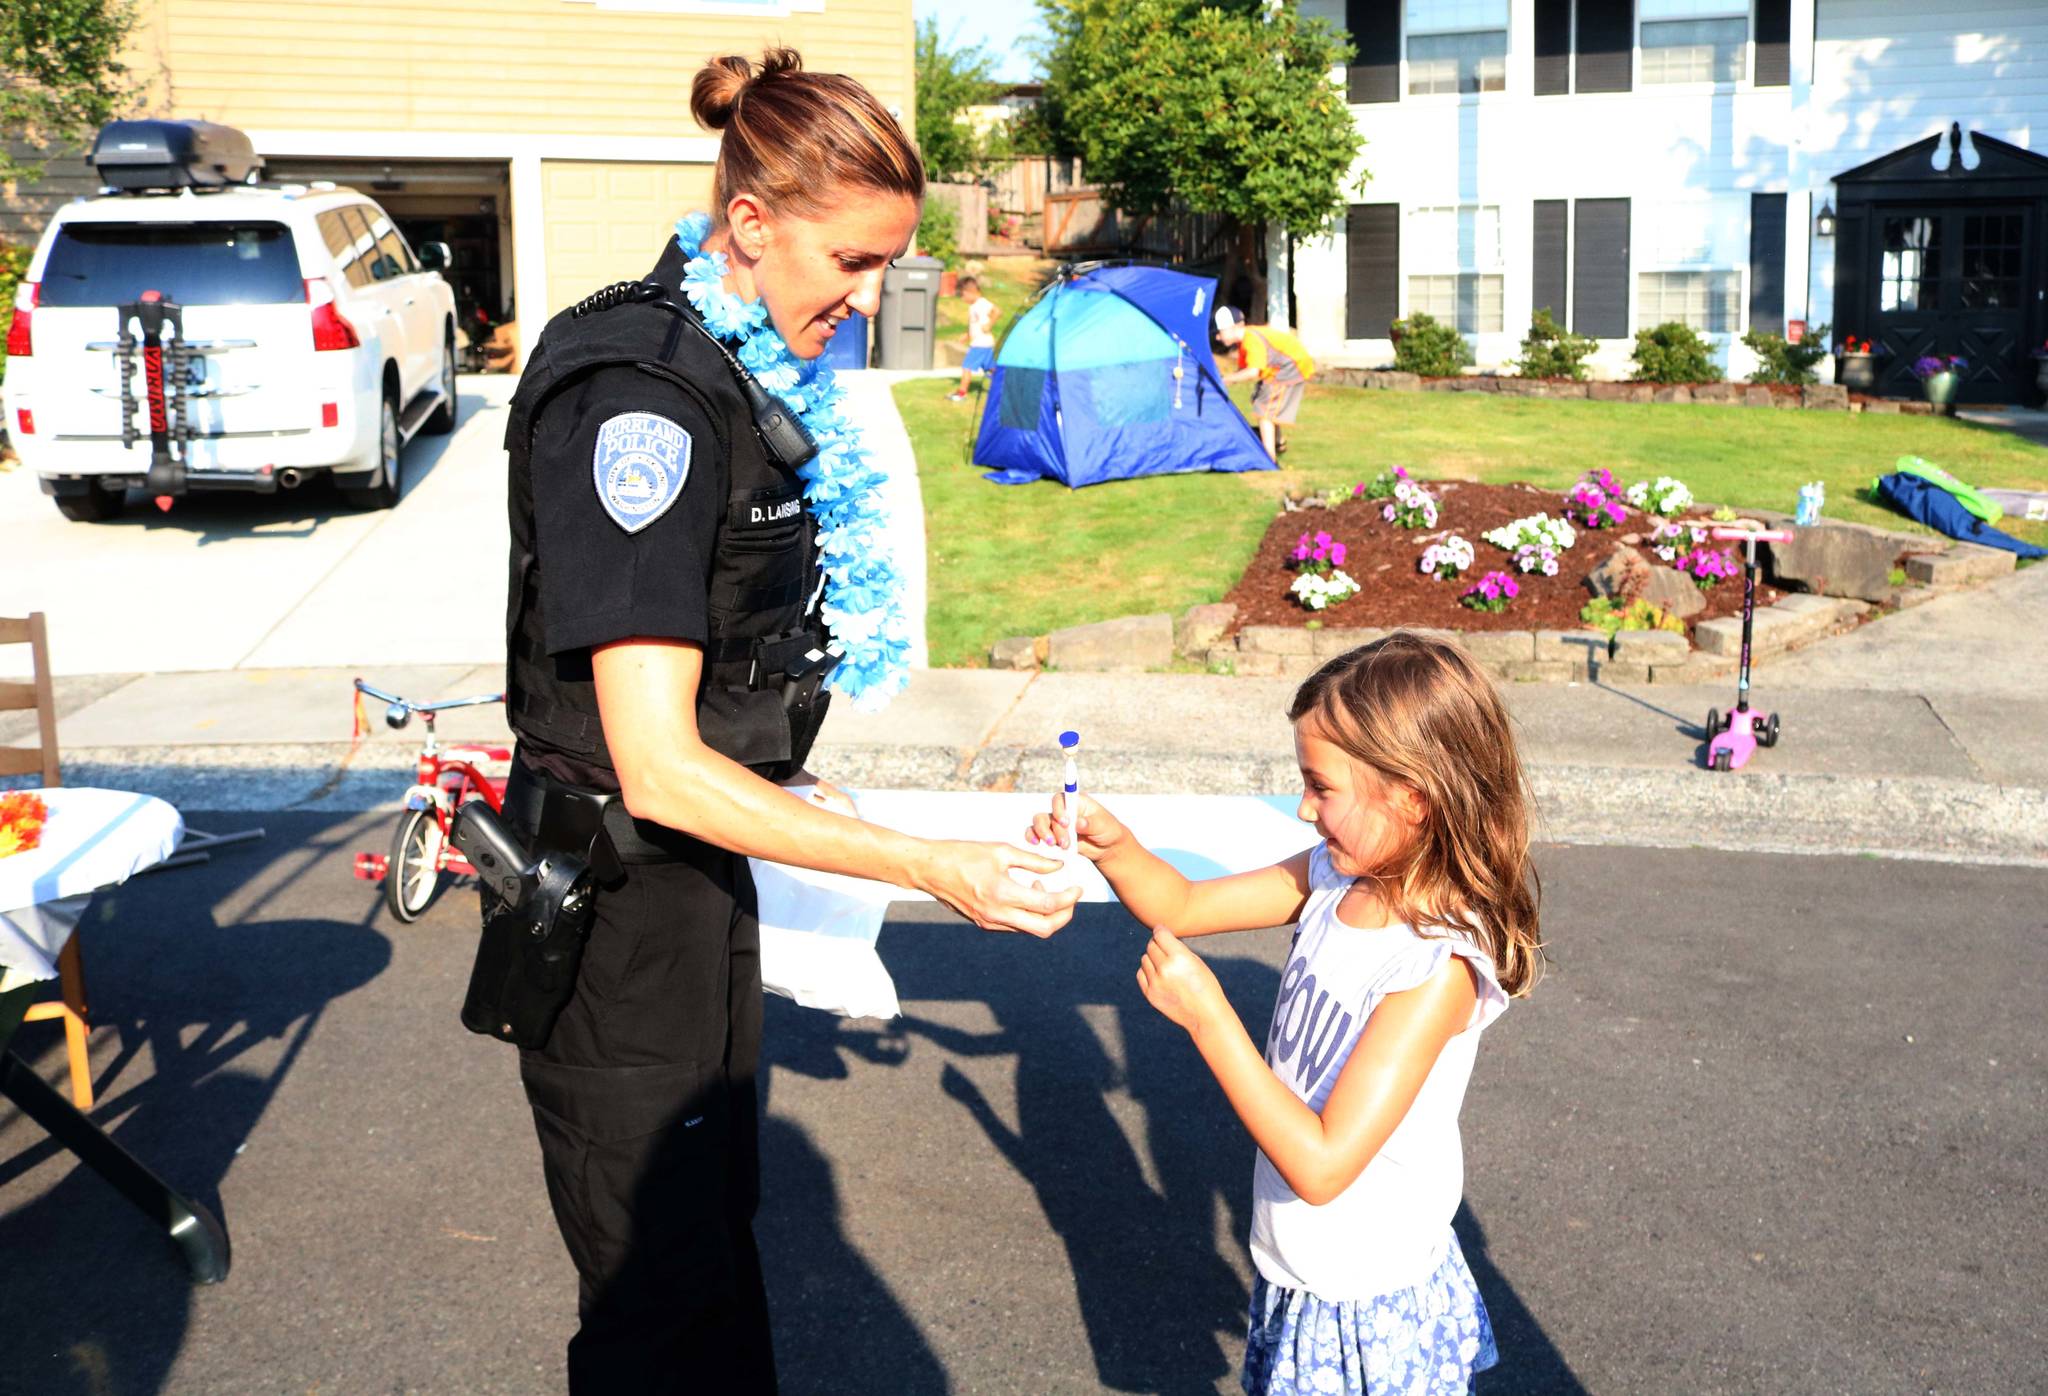 Neighborhood Resource Officer Deana Lansing hands Isabella Adkins, 6, a pen during a community cookout in the 13600 block of 116th Avenue Northeast in Kirkland on National Night Out Tuesday. Megan Campbell/staff photo